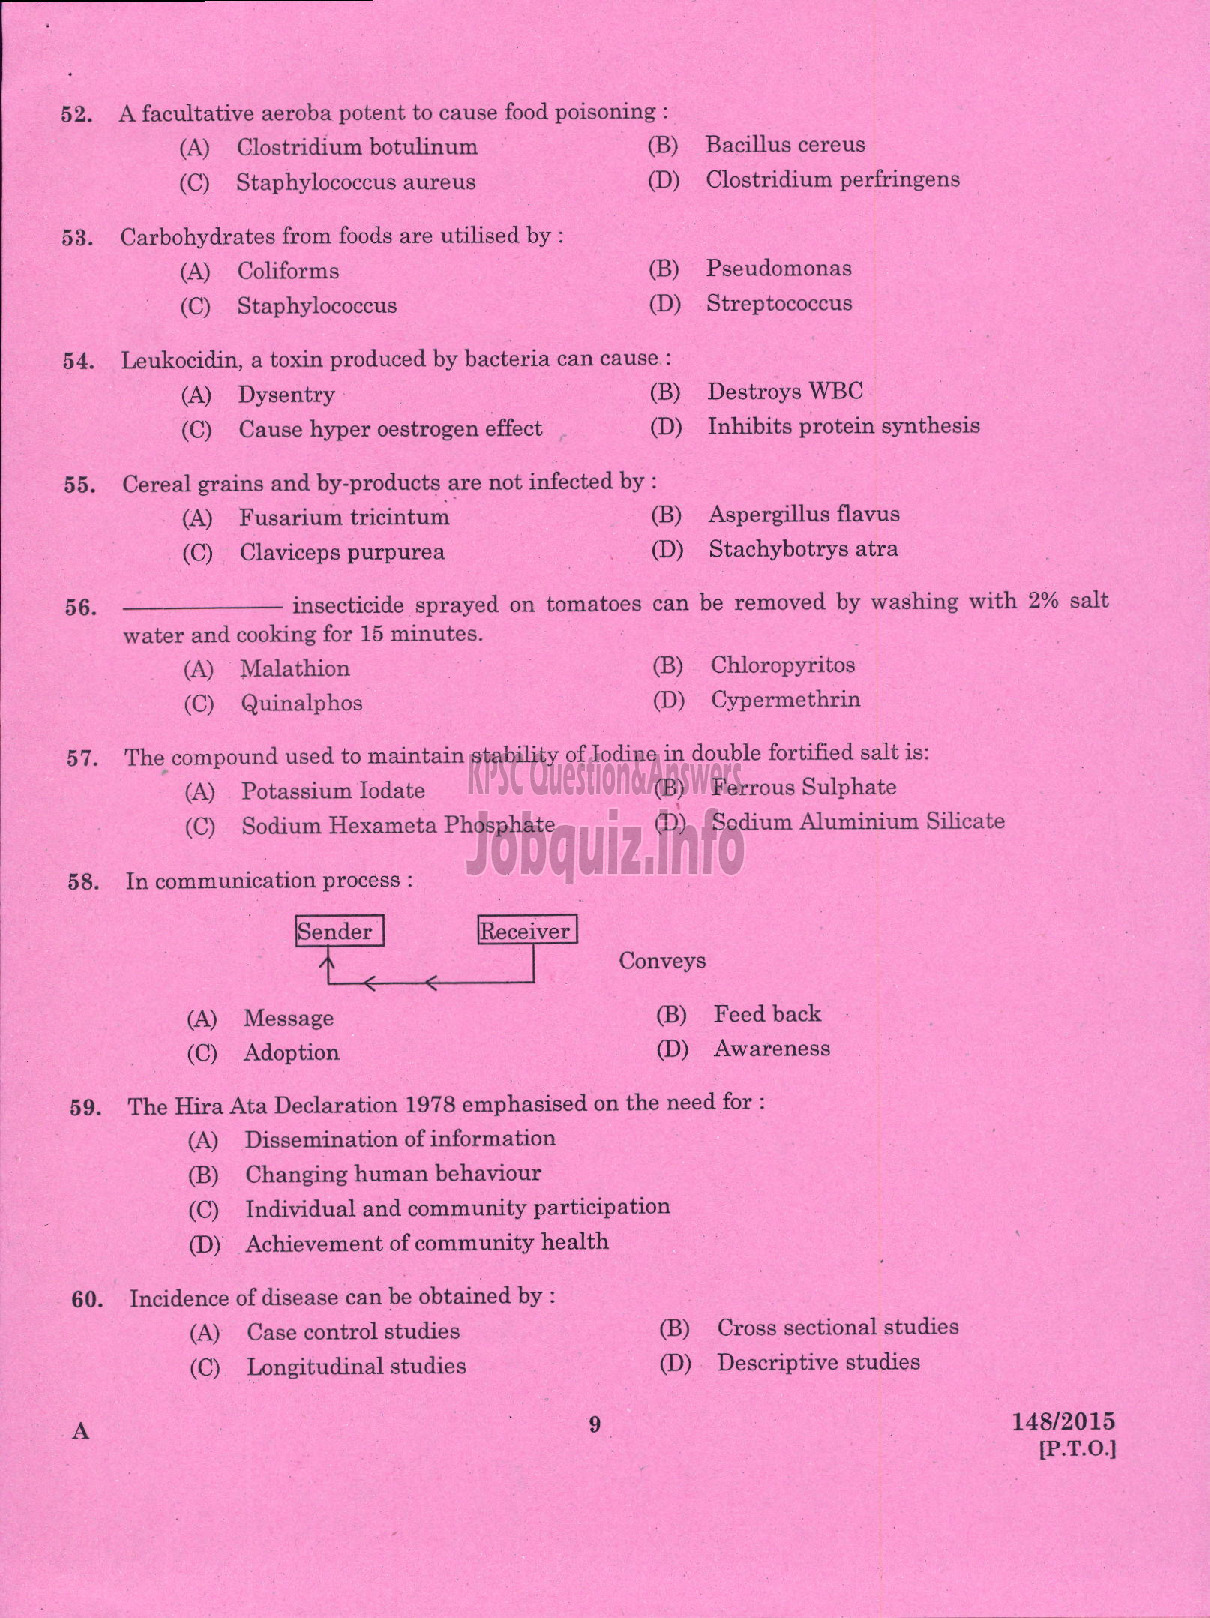 Kerala PSC Question Paper - LECTURER IN HOMESCIENCE FOOD AND NUTRITION COLLEGIATE EDUCATION-7